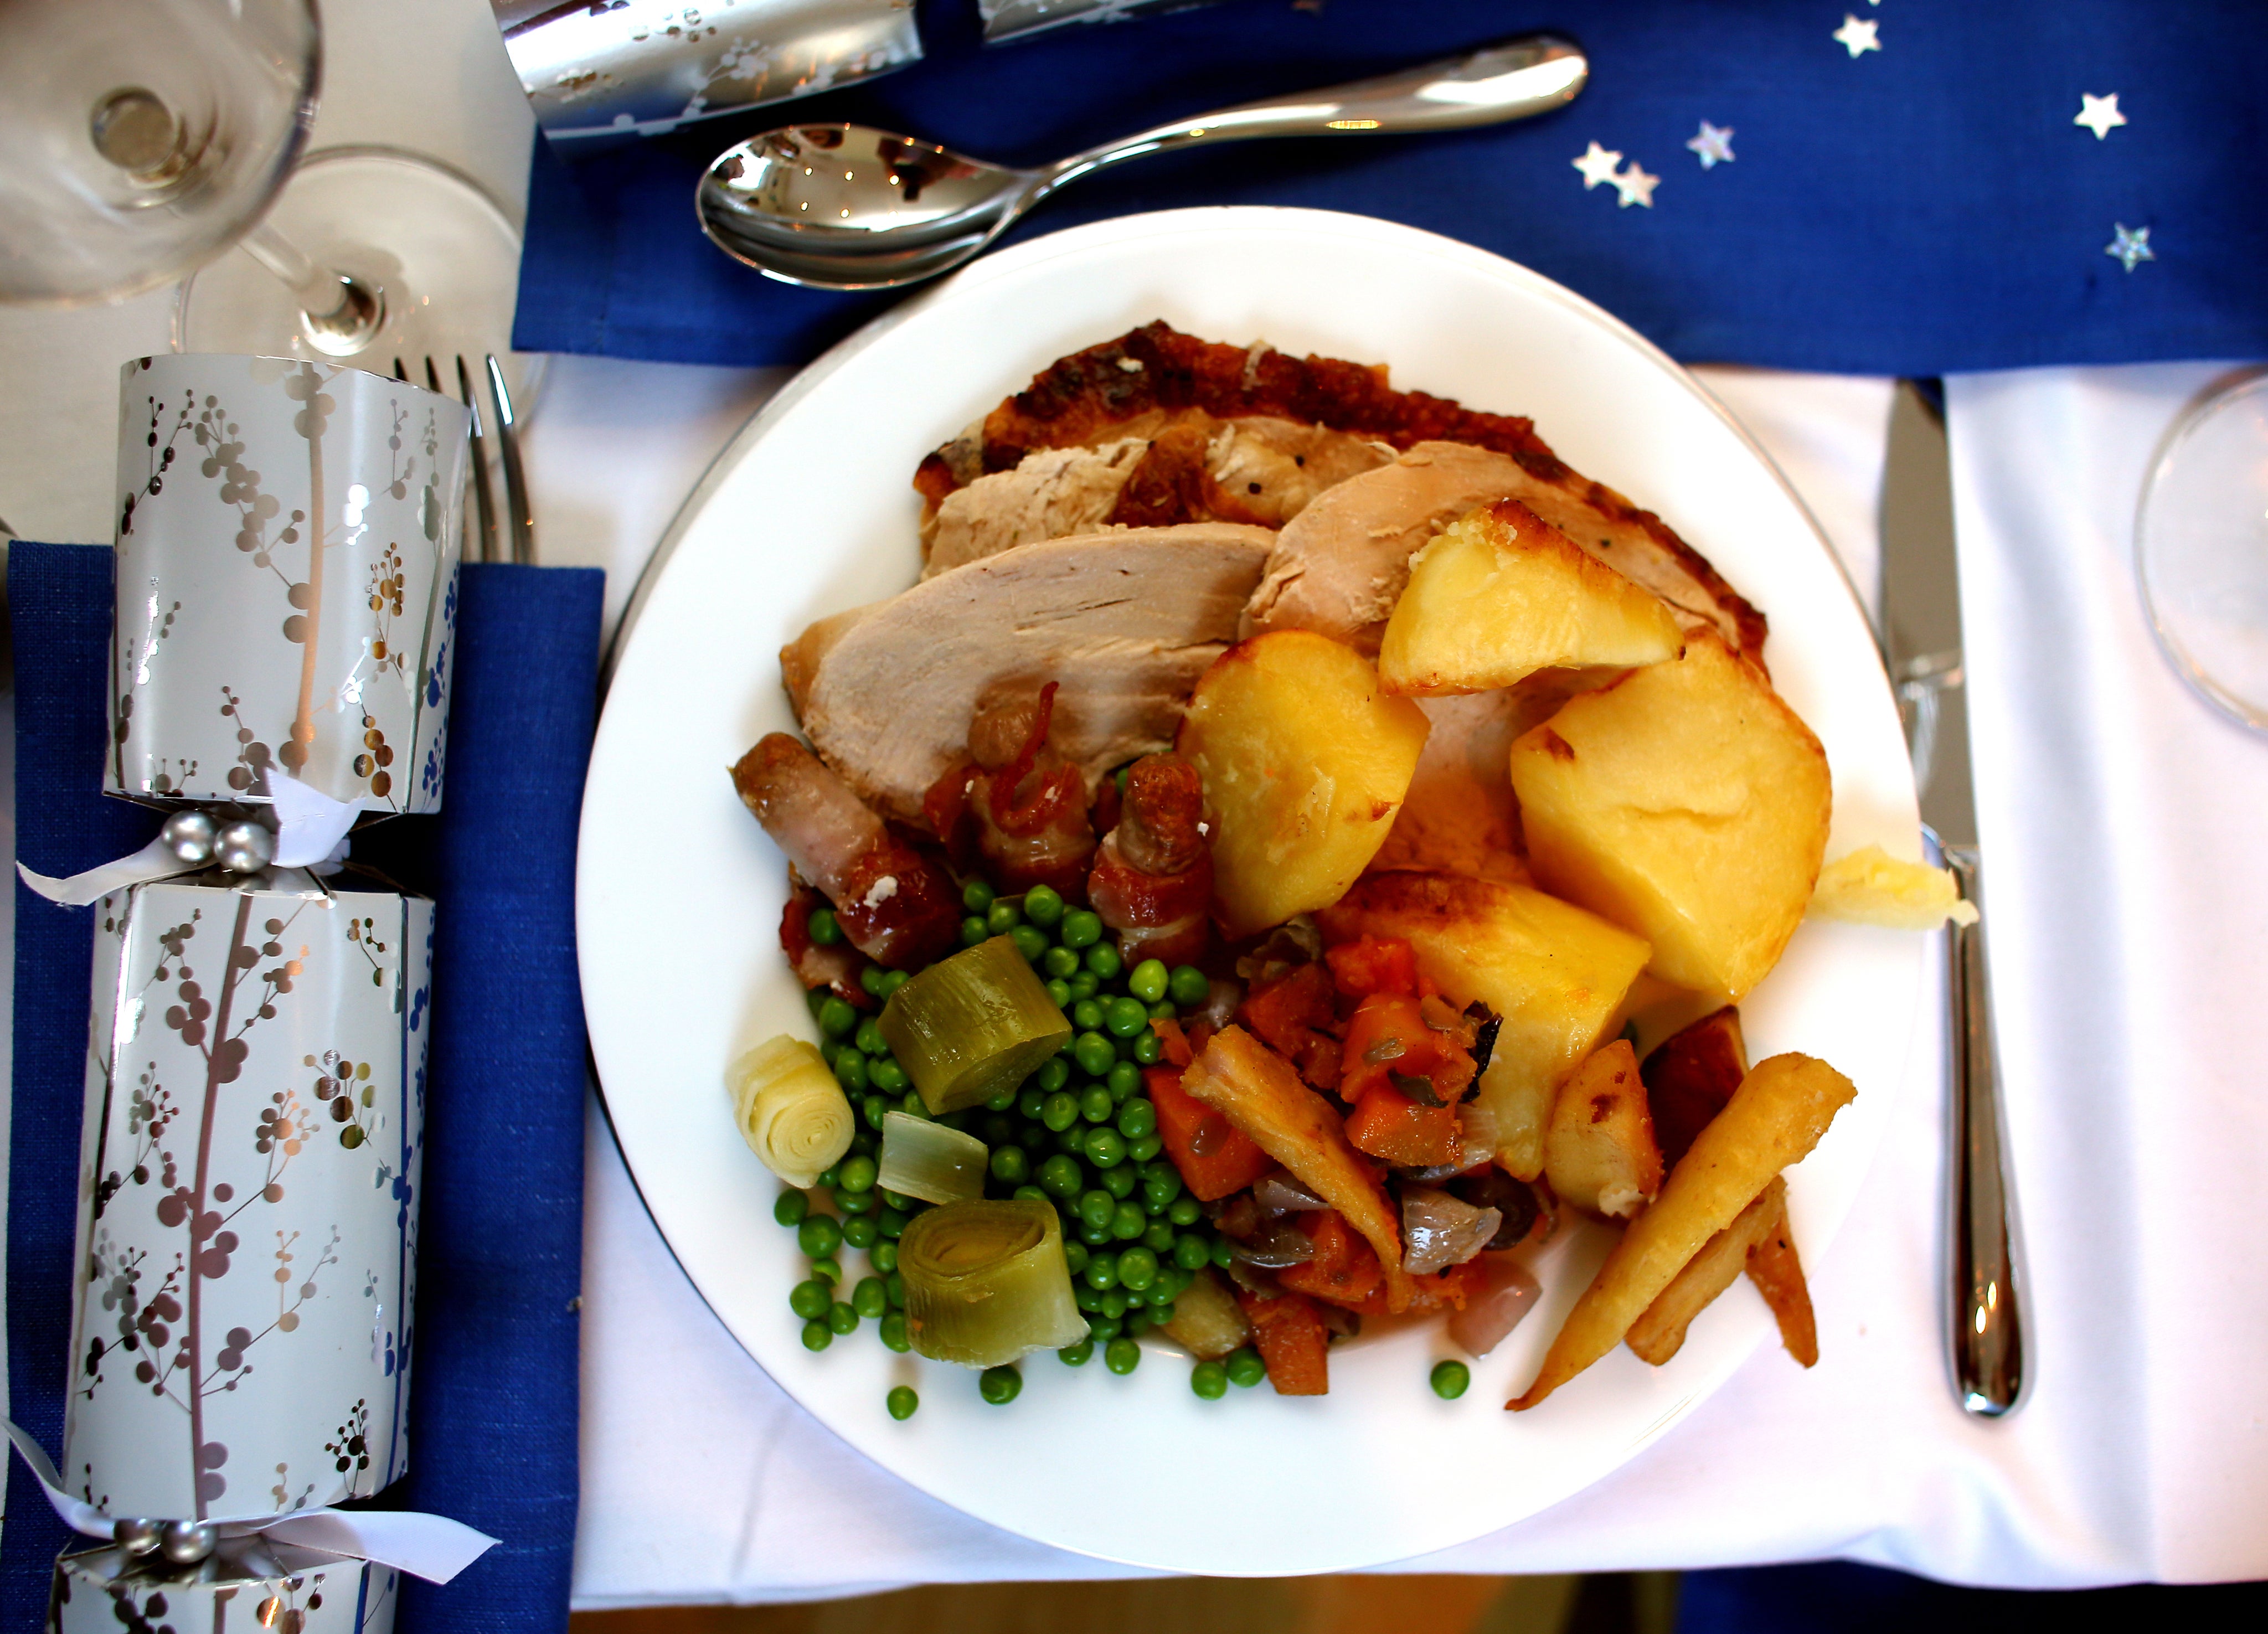 The average cost of a traditional Christmas dinner has increased